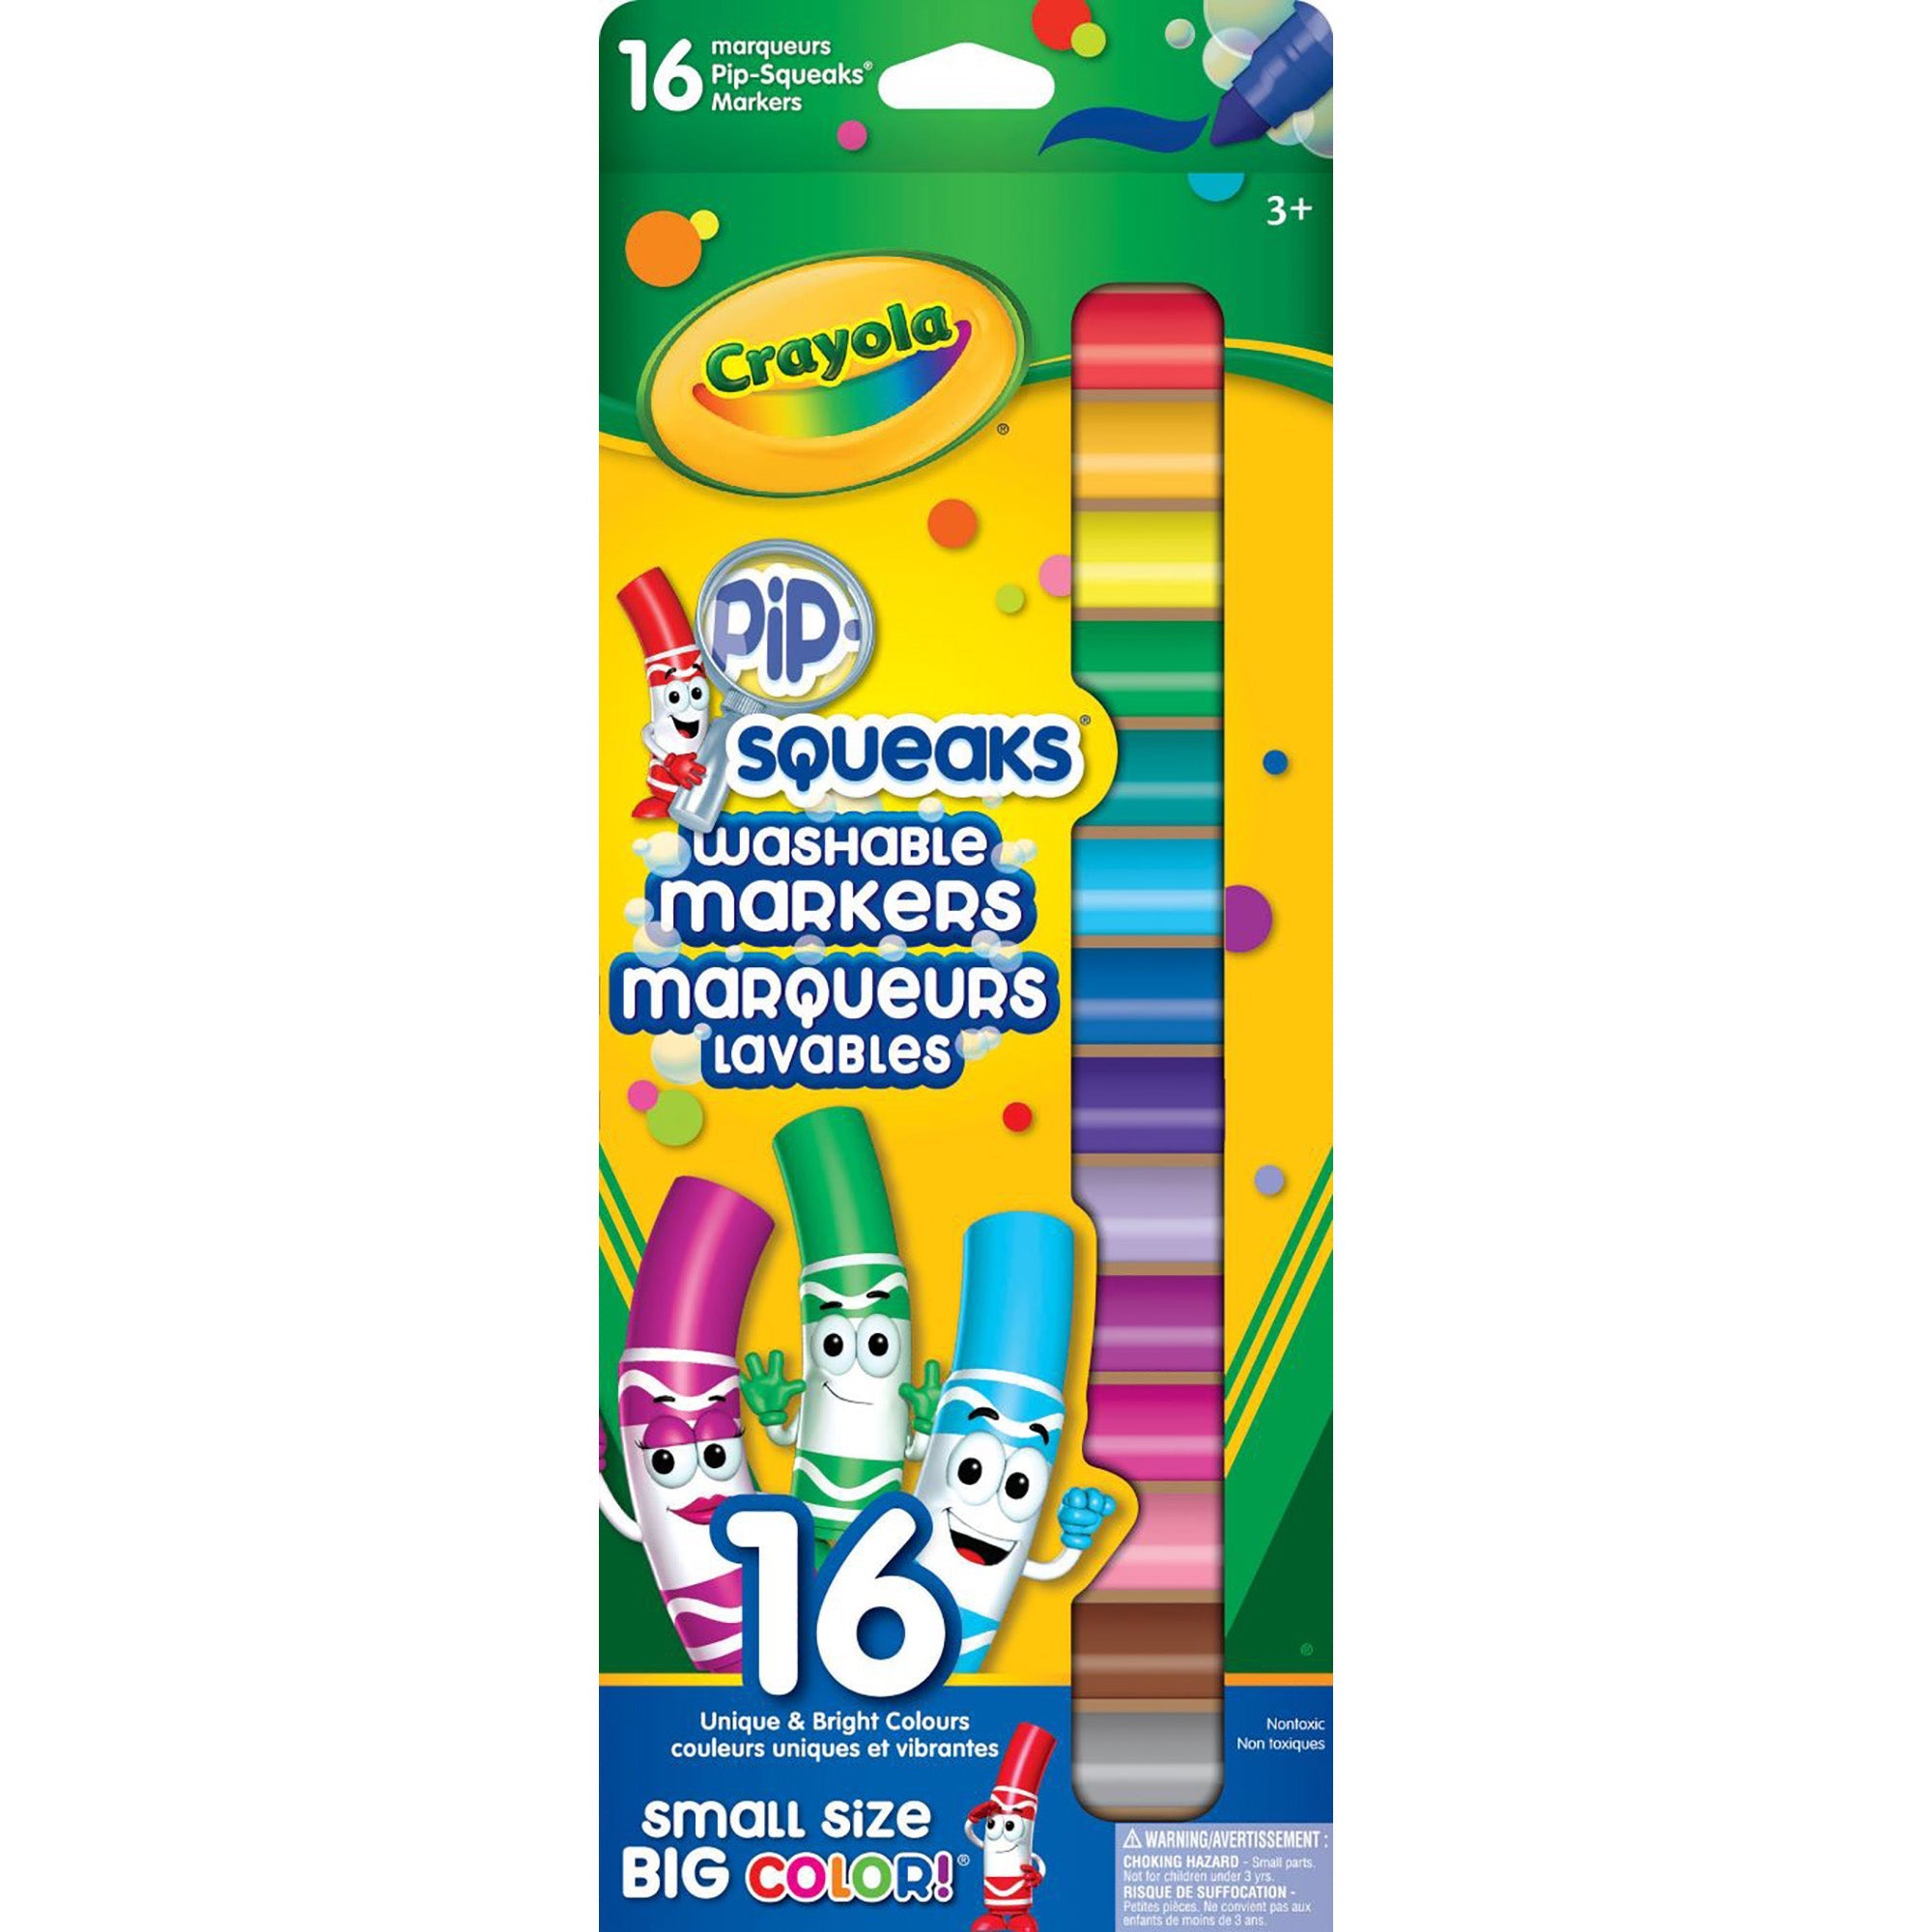 Crayola Pip-Squeaks 16 Markers - Broad Line - Washable 4in